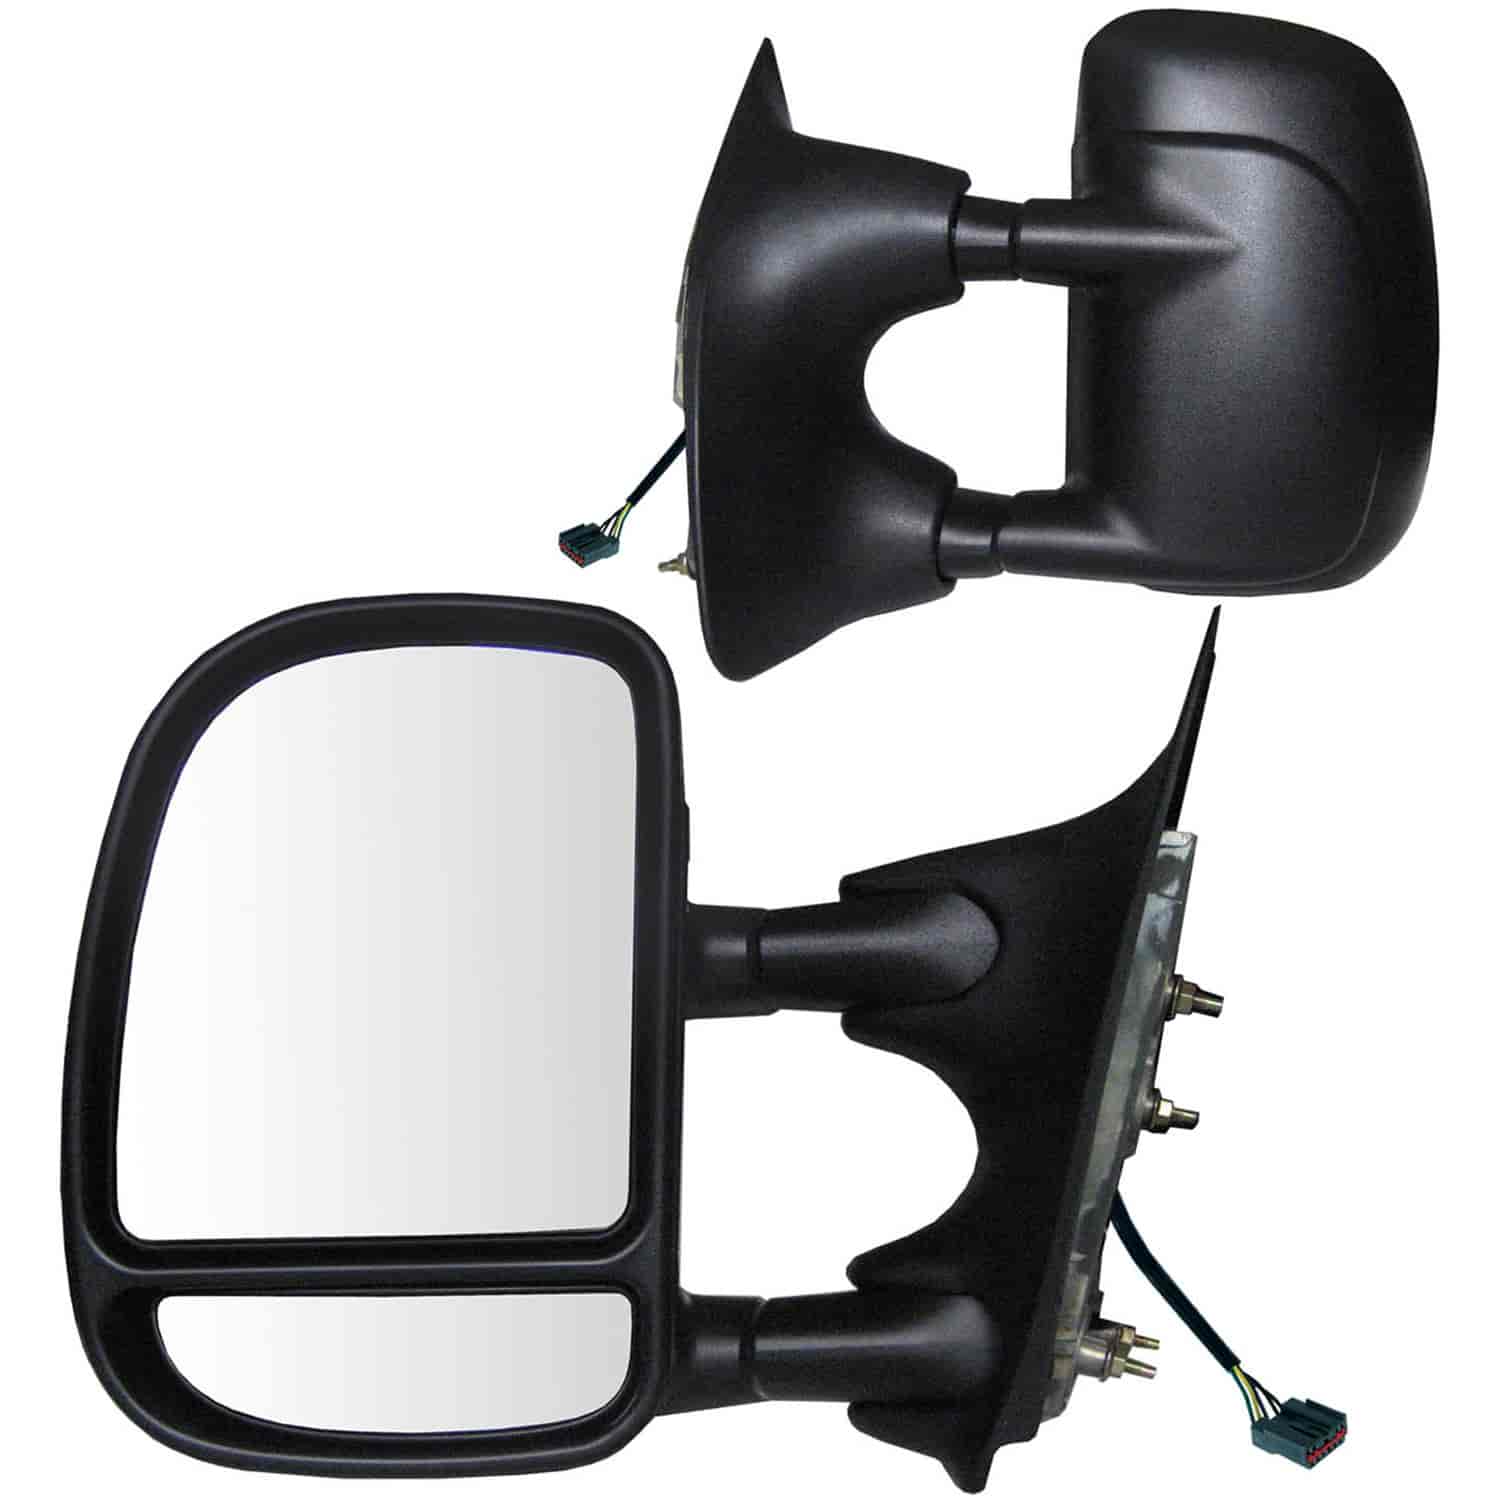 OEM Style Replacement mirror set for 01-07 Ford